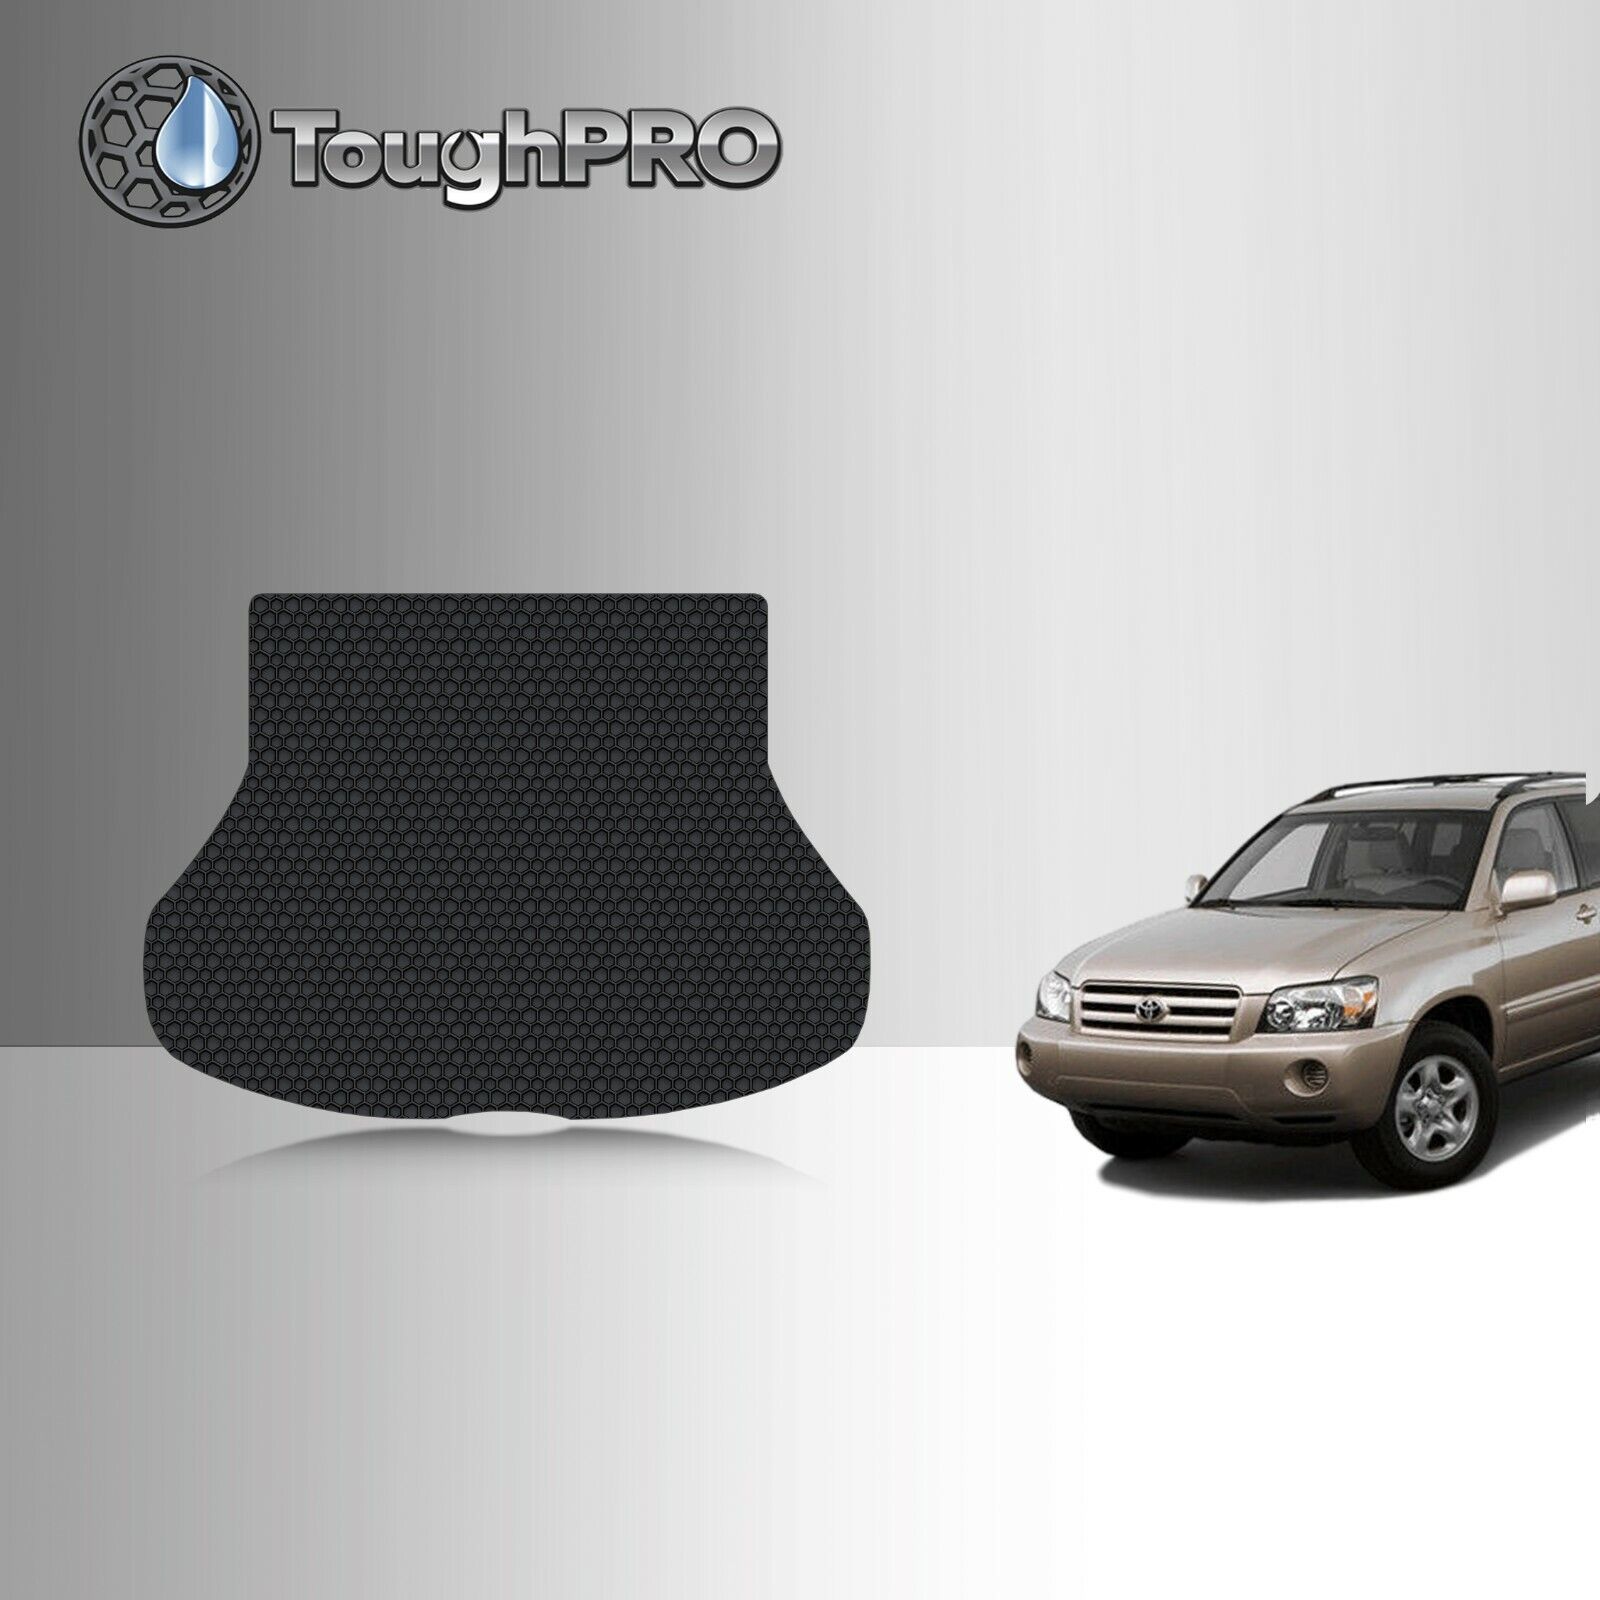 ToughPRO Cargo Mat Black For Toyota Highlander All Weather Custom Fit 2001-2007